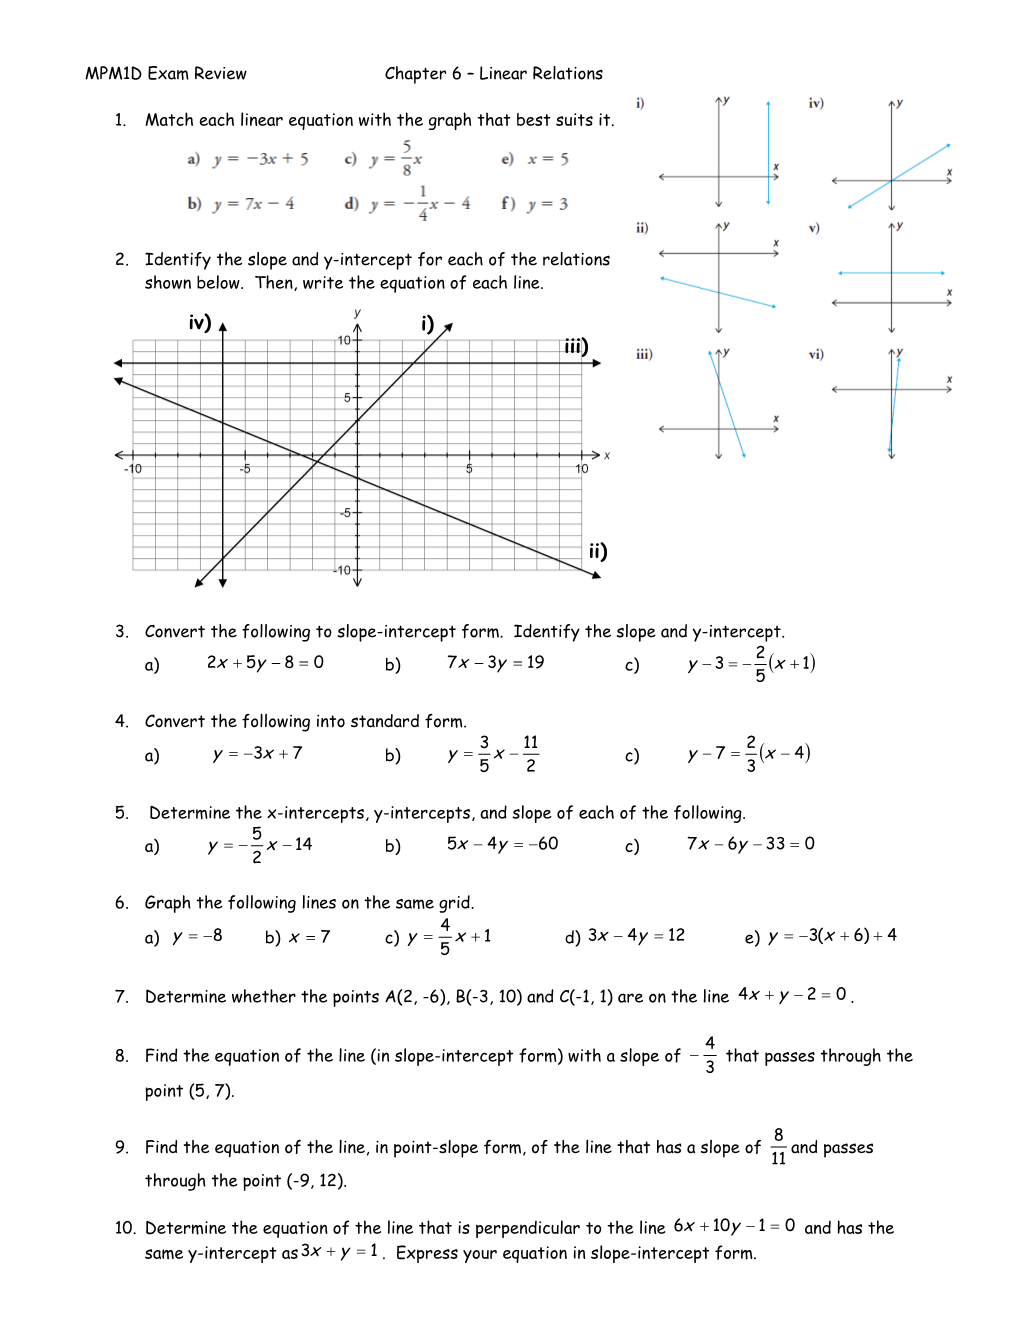 MPM1D Exam Review Chapter 6 Linear Relations